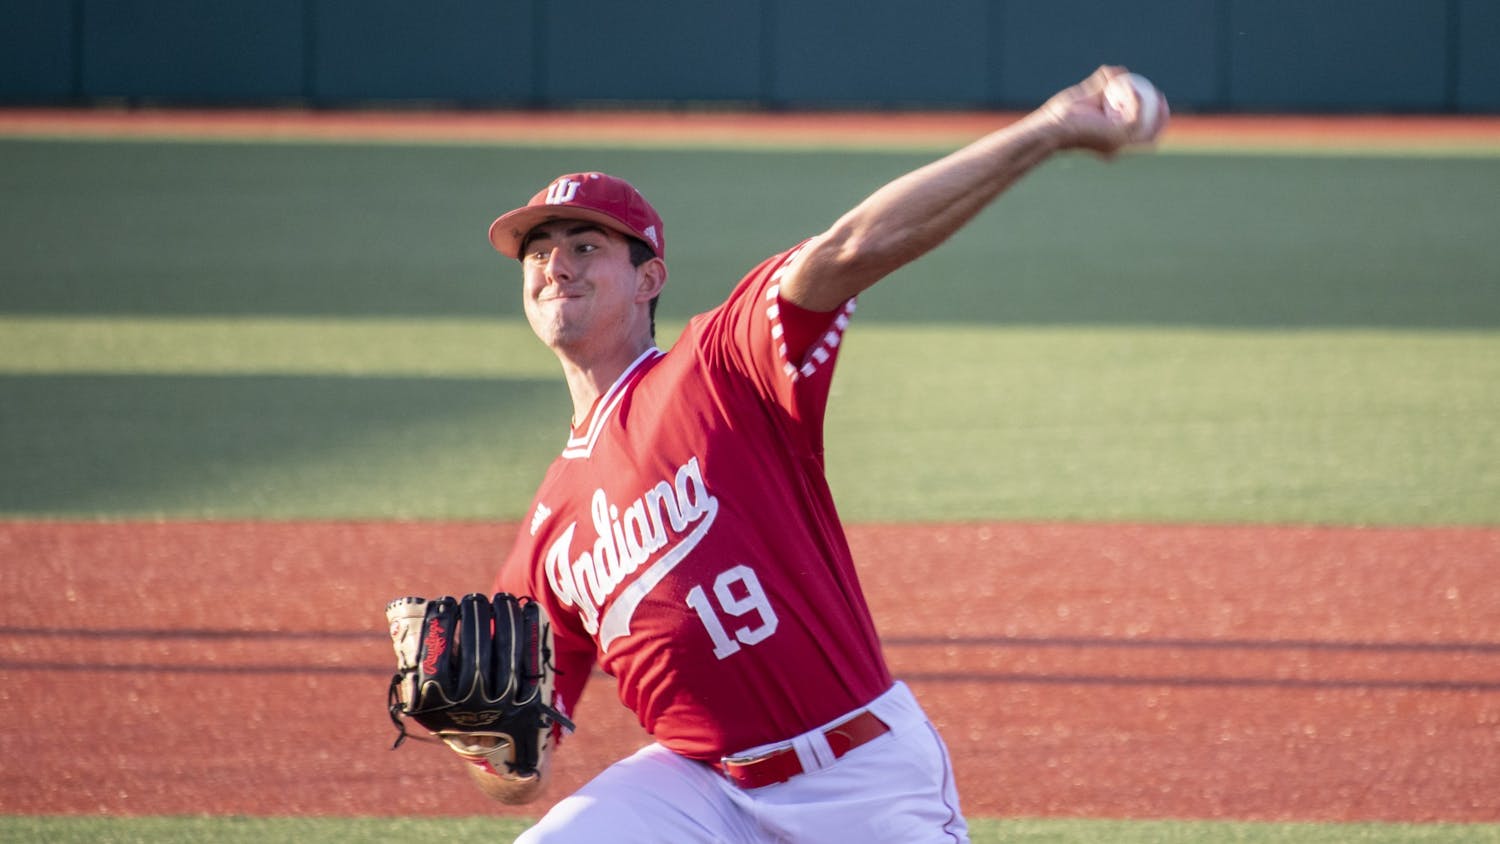 Then-sophomore pitcher Tommy Sommer pitches the ball against the University of Louisville on May 14, 2019, at Bart Kaufman Field.